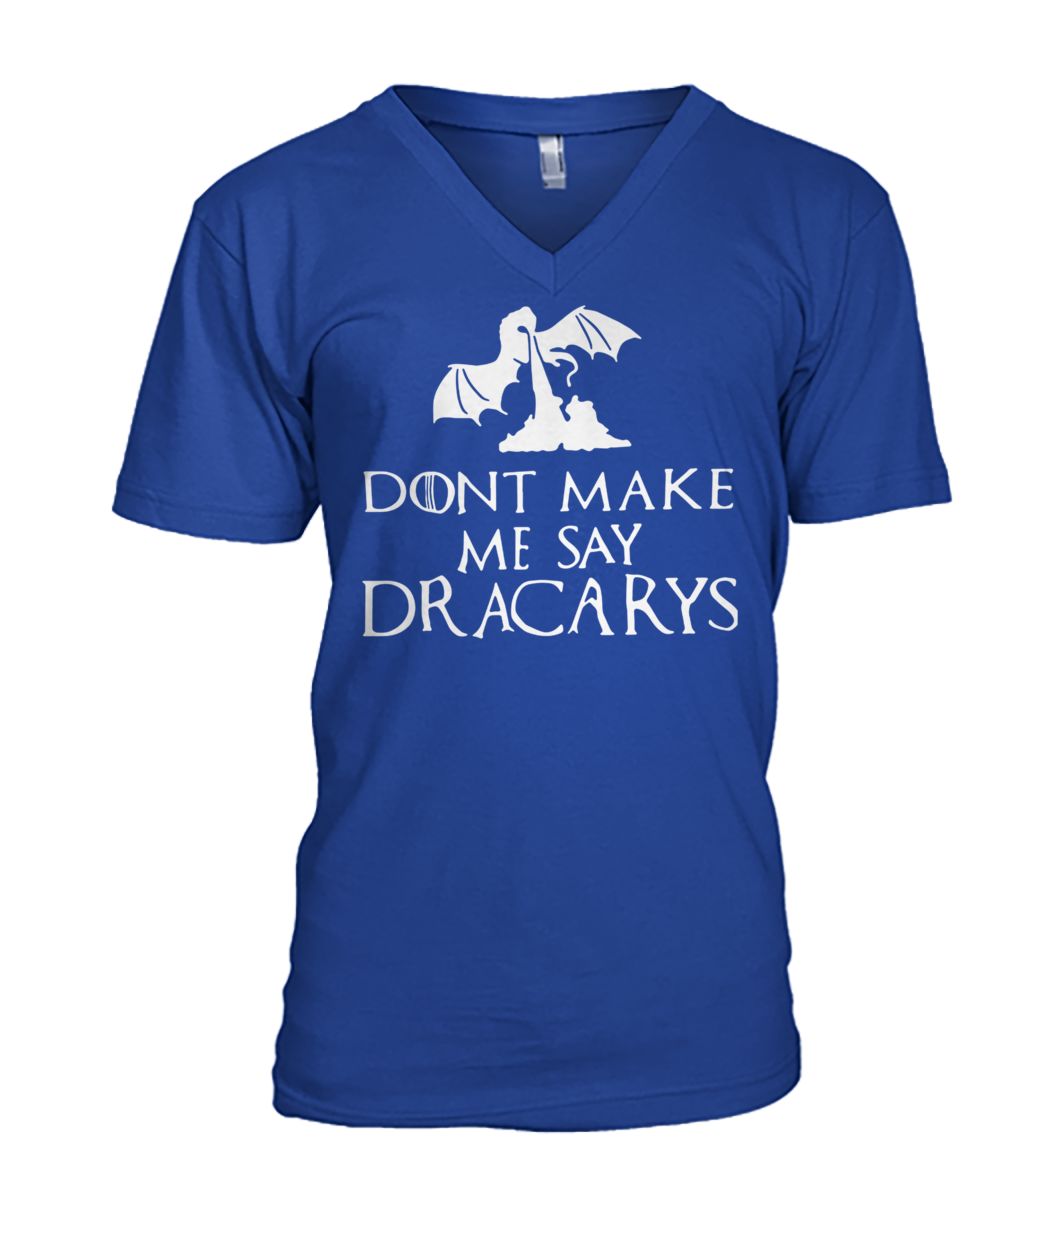 Game of thrones don't make me say dracarys mens v-neck